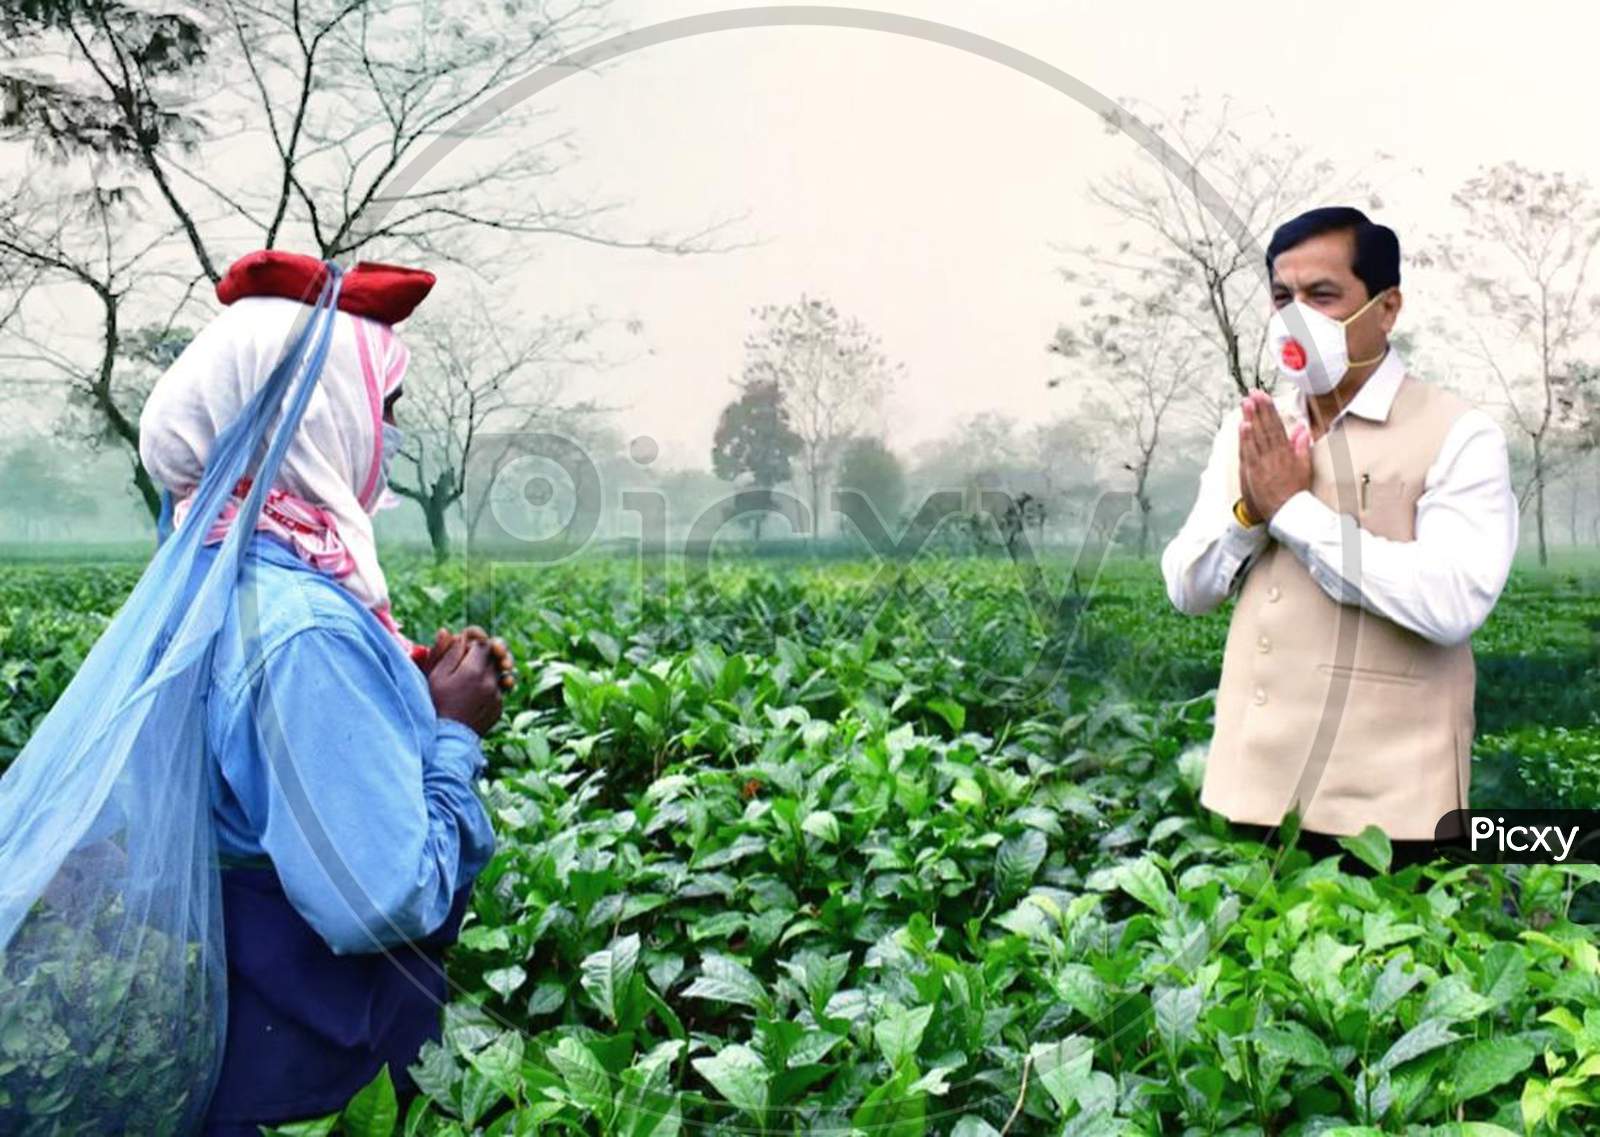 Assam Chief Minister Sarbananda Sonowal Interacted With The Tea Garden Workers During Nationwide Lockdown Amidst Coronavirus or COVID-19  Outbreak 
 in Dibrugarh District Of Assam On April 24,2020.